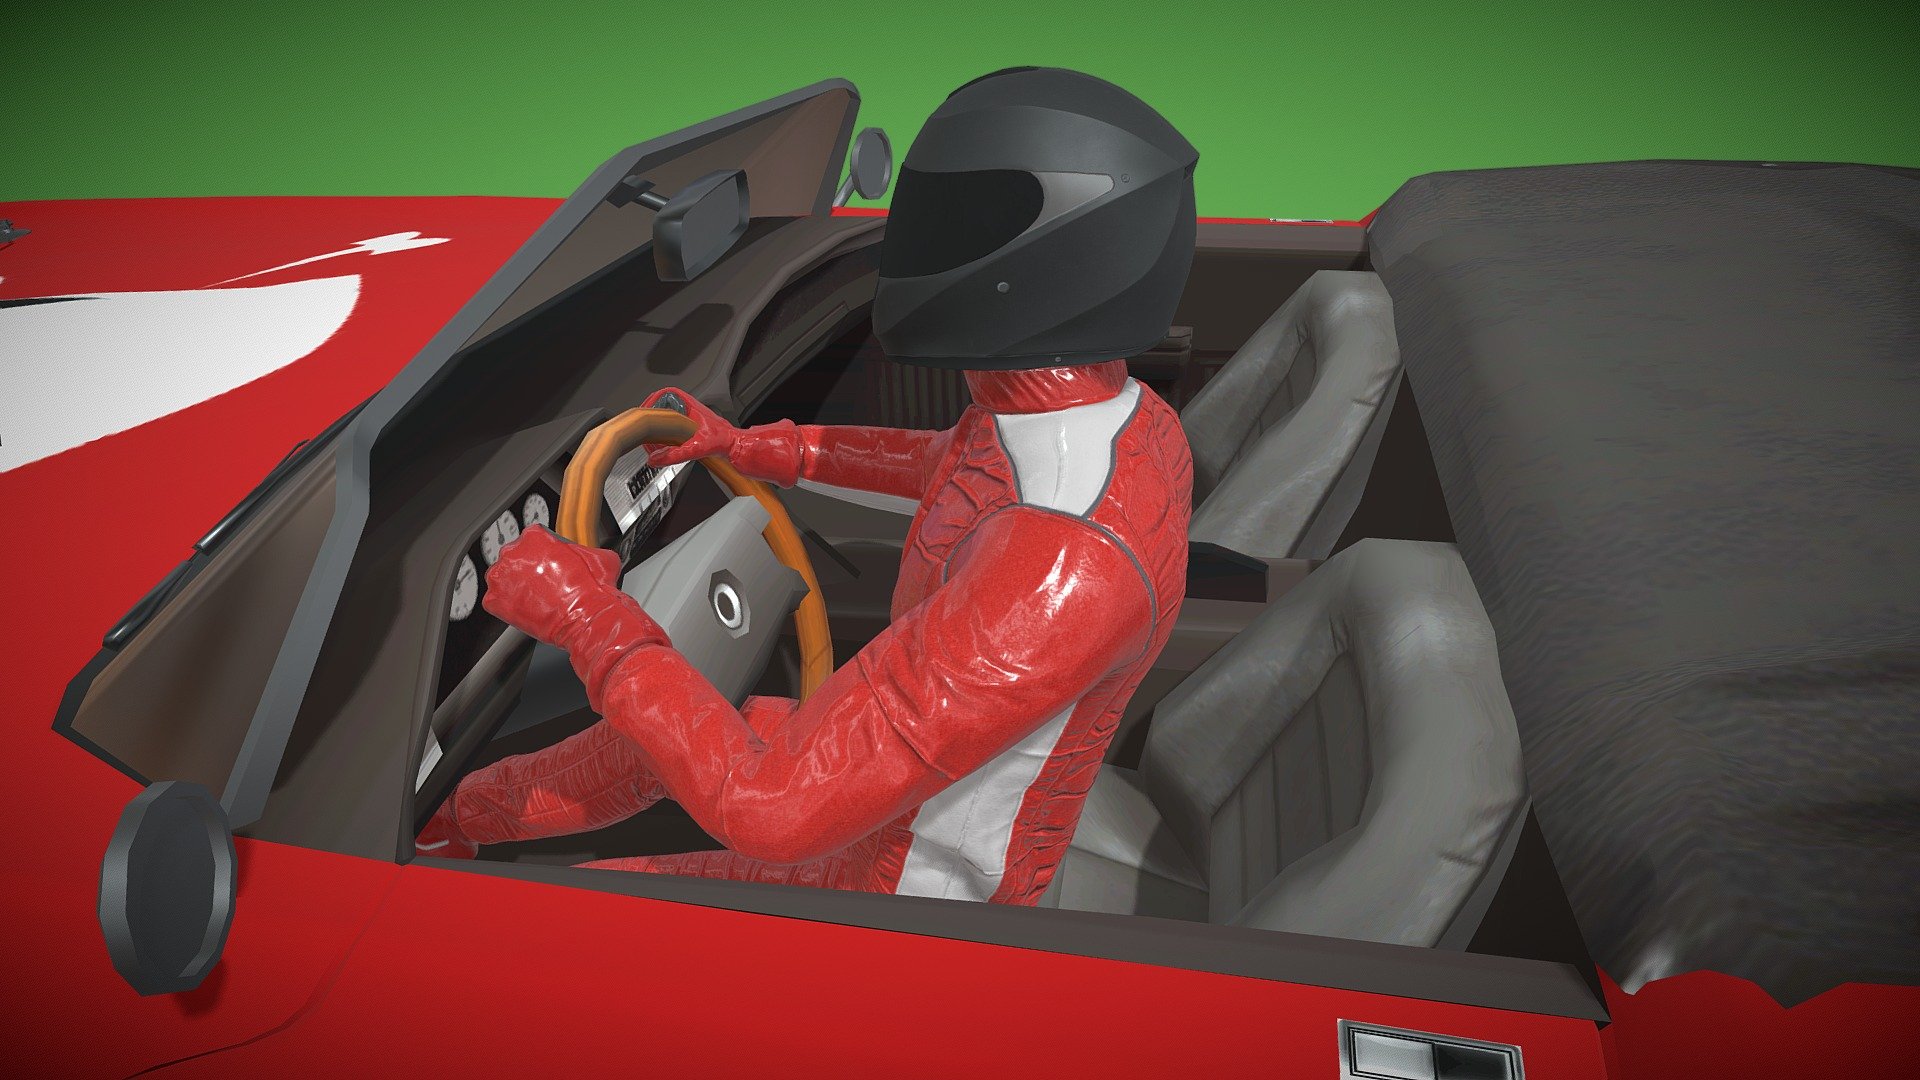 A red sports car being driven by a race car driver as it moves around a race track, looped animation at 30 frames per second.

See this 3D model in action, and more models like it, in this collection of free augmented reality apps:

https://morpheusar.com/ - Animated Red Sports Car with Driver Loop - 3D model by LasquetiSpice 3d model